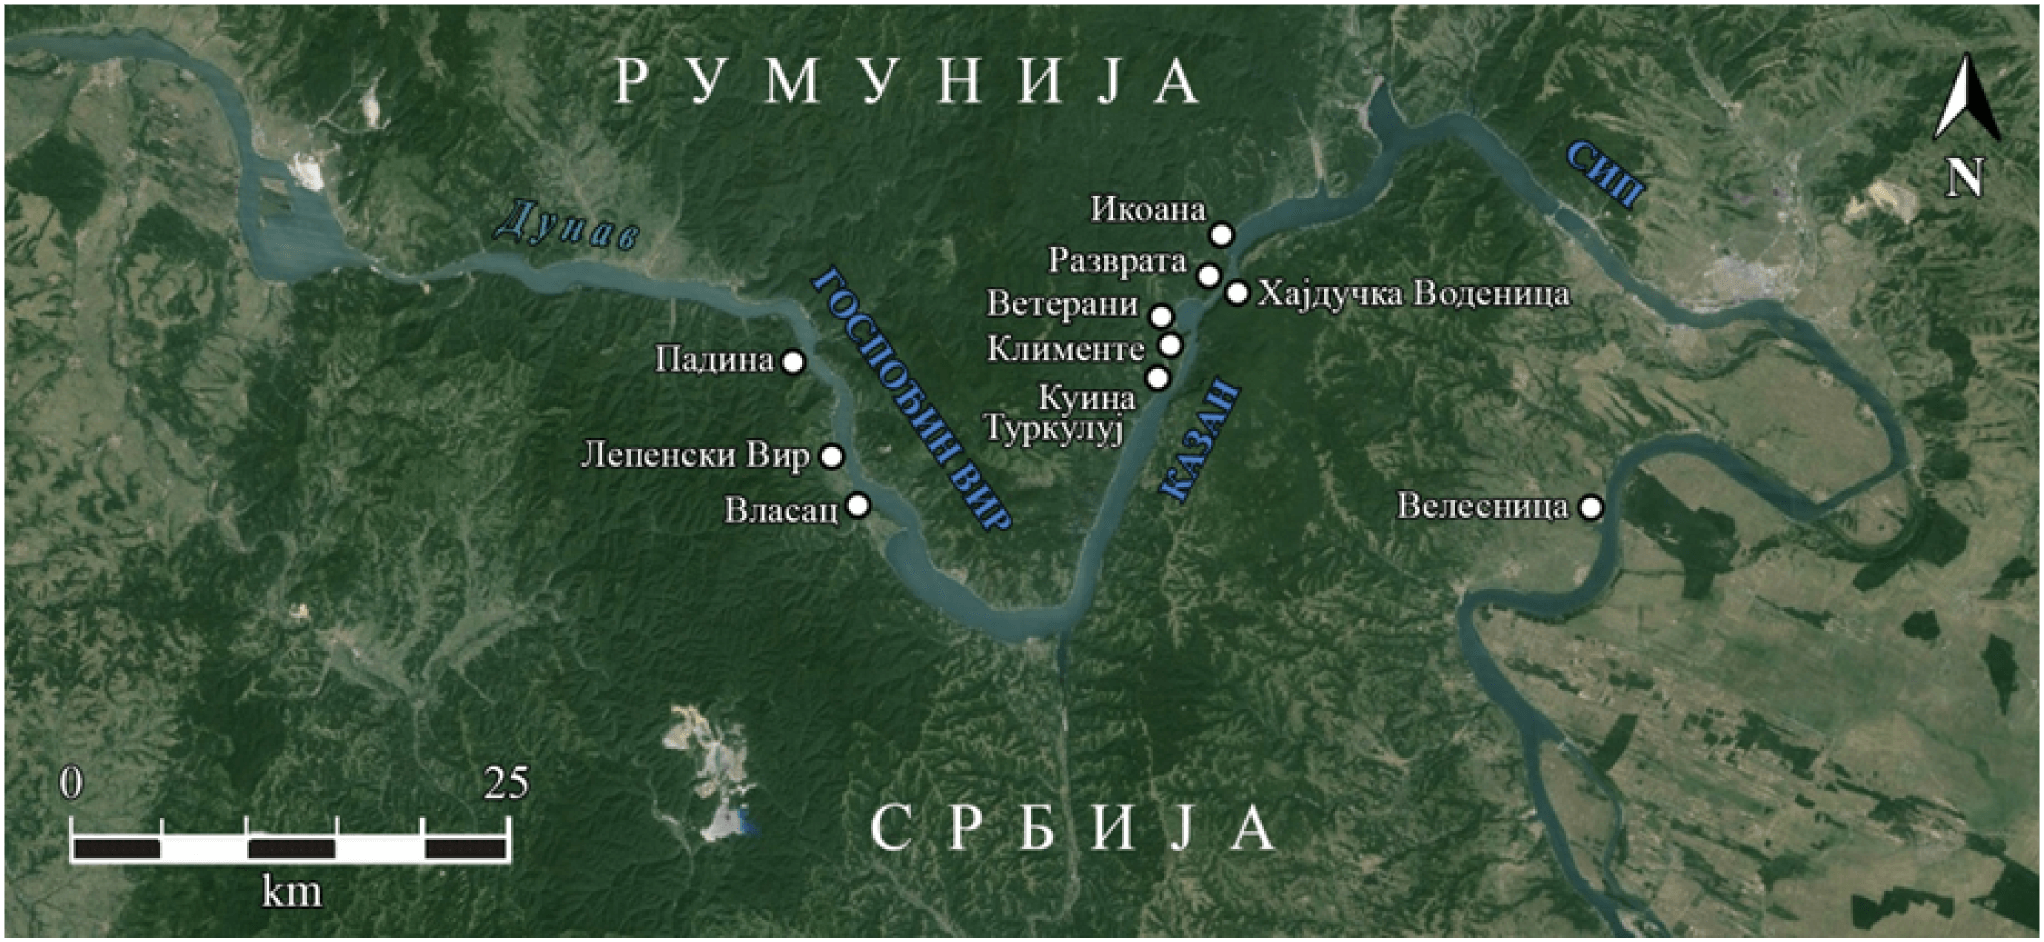 Map of the Đerdap Gorge (the Iron Gates Gorge), depicting the archaeological sites dating from the Mesolithic and Neolithic periods (9500–5500 BC) which are mentioned here.